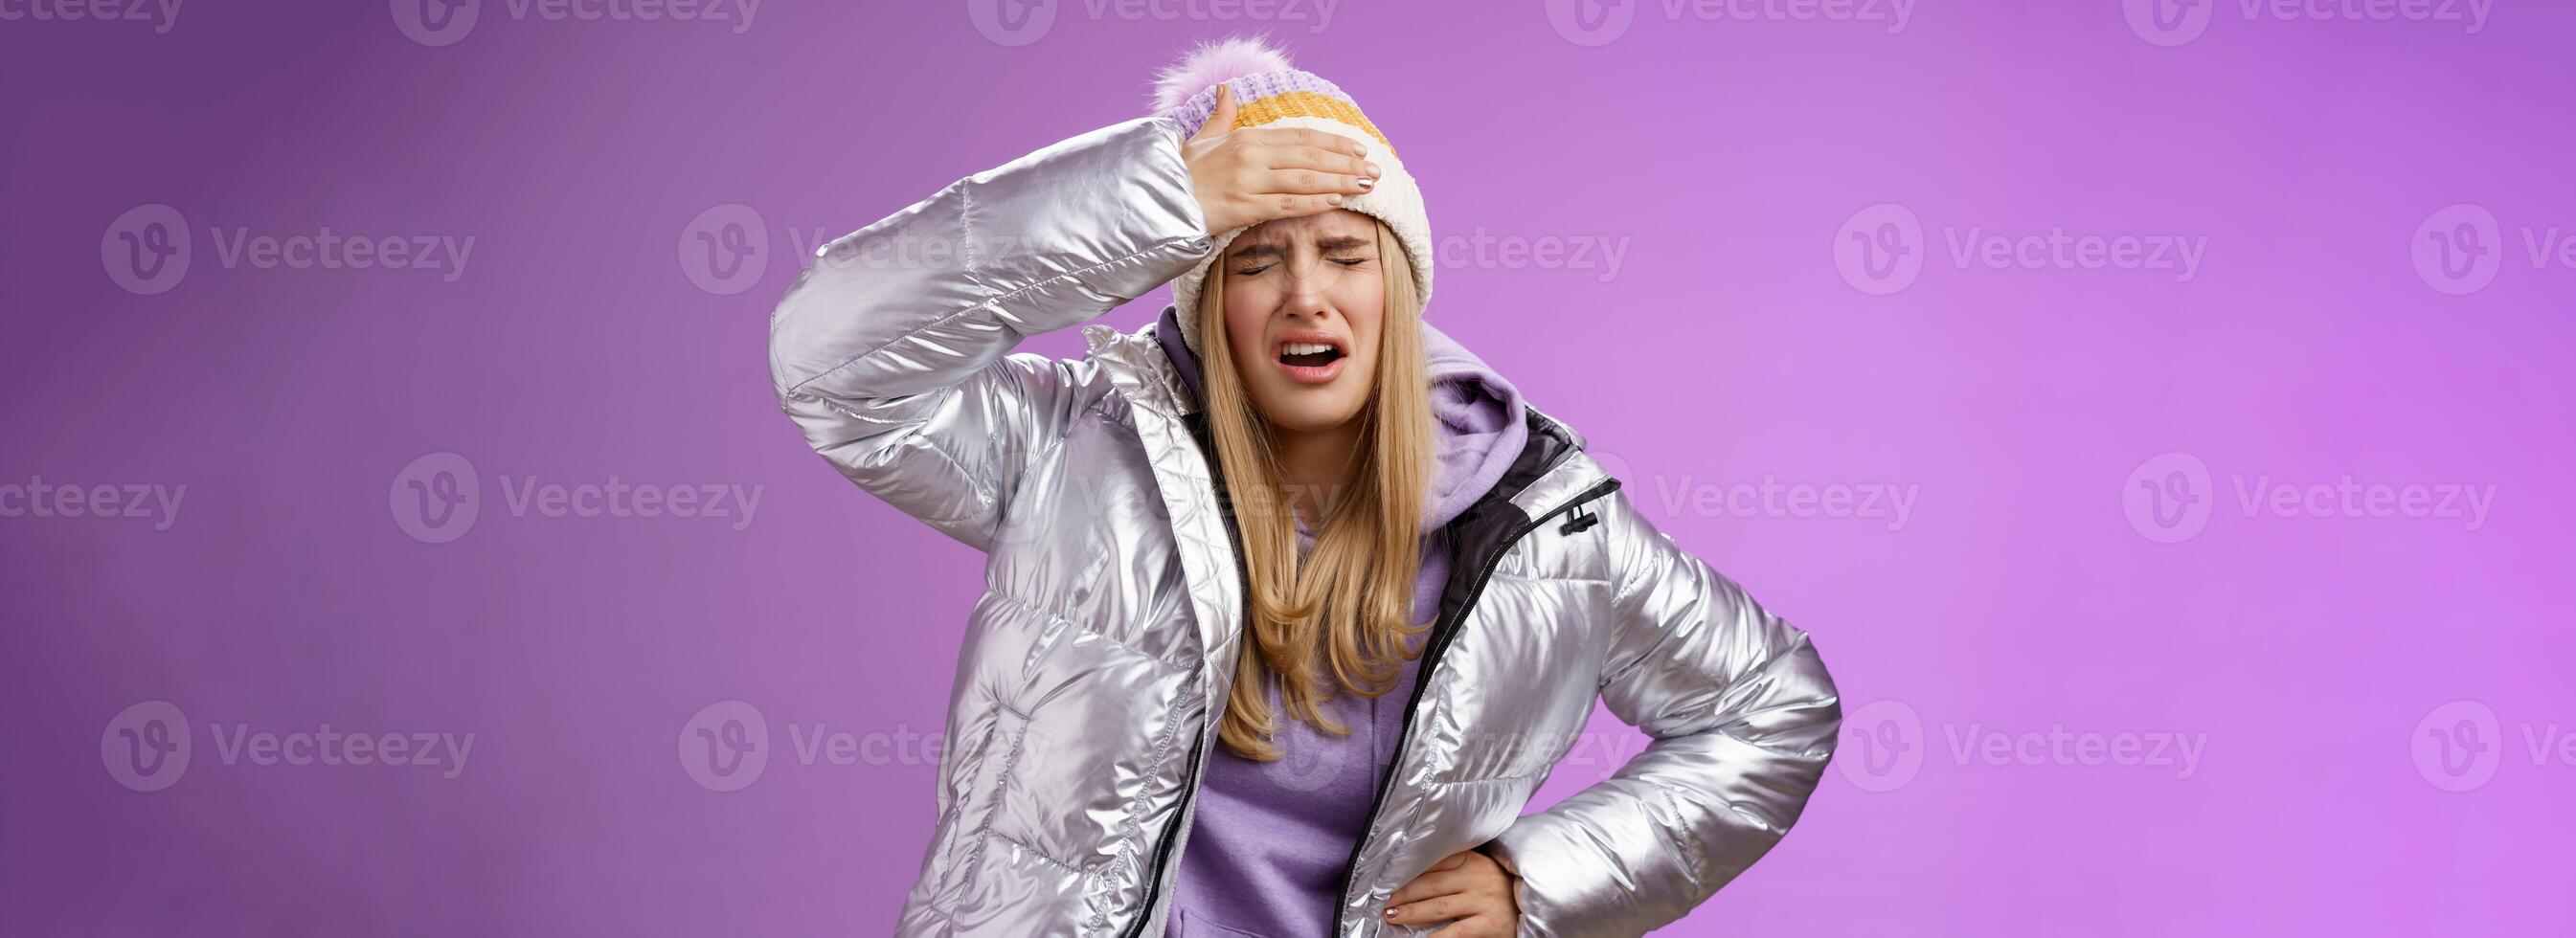 Girl sick tired touch forehead painful feeling grimacing complaining boyfriend shot snowball woman face standing bothered fed up and upset, whining displeased suffering headache, purple background photo